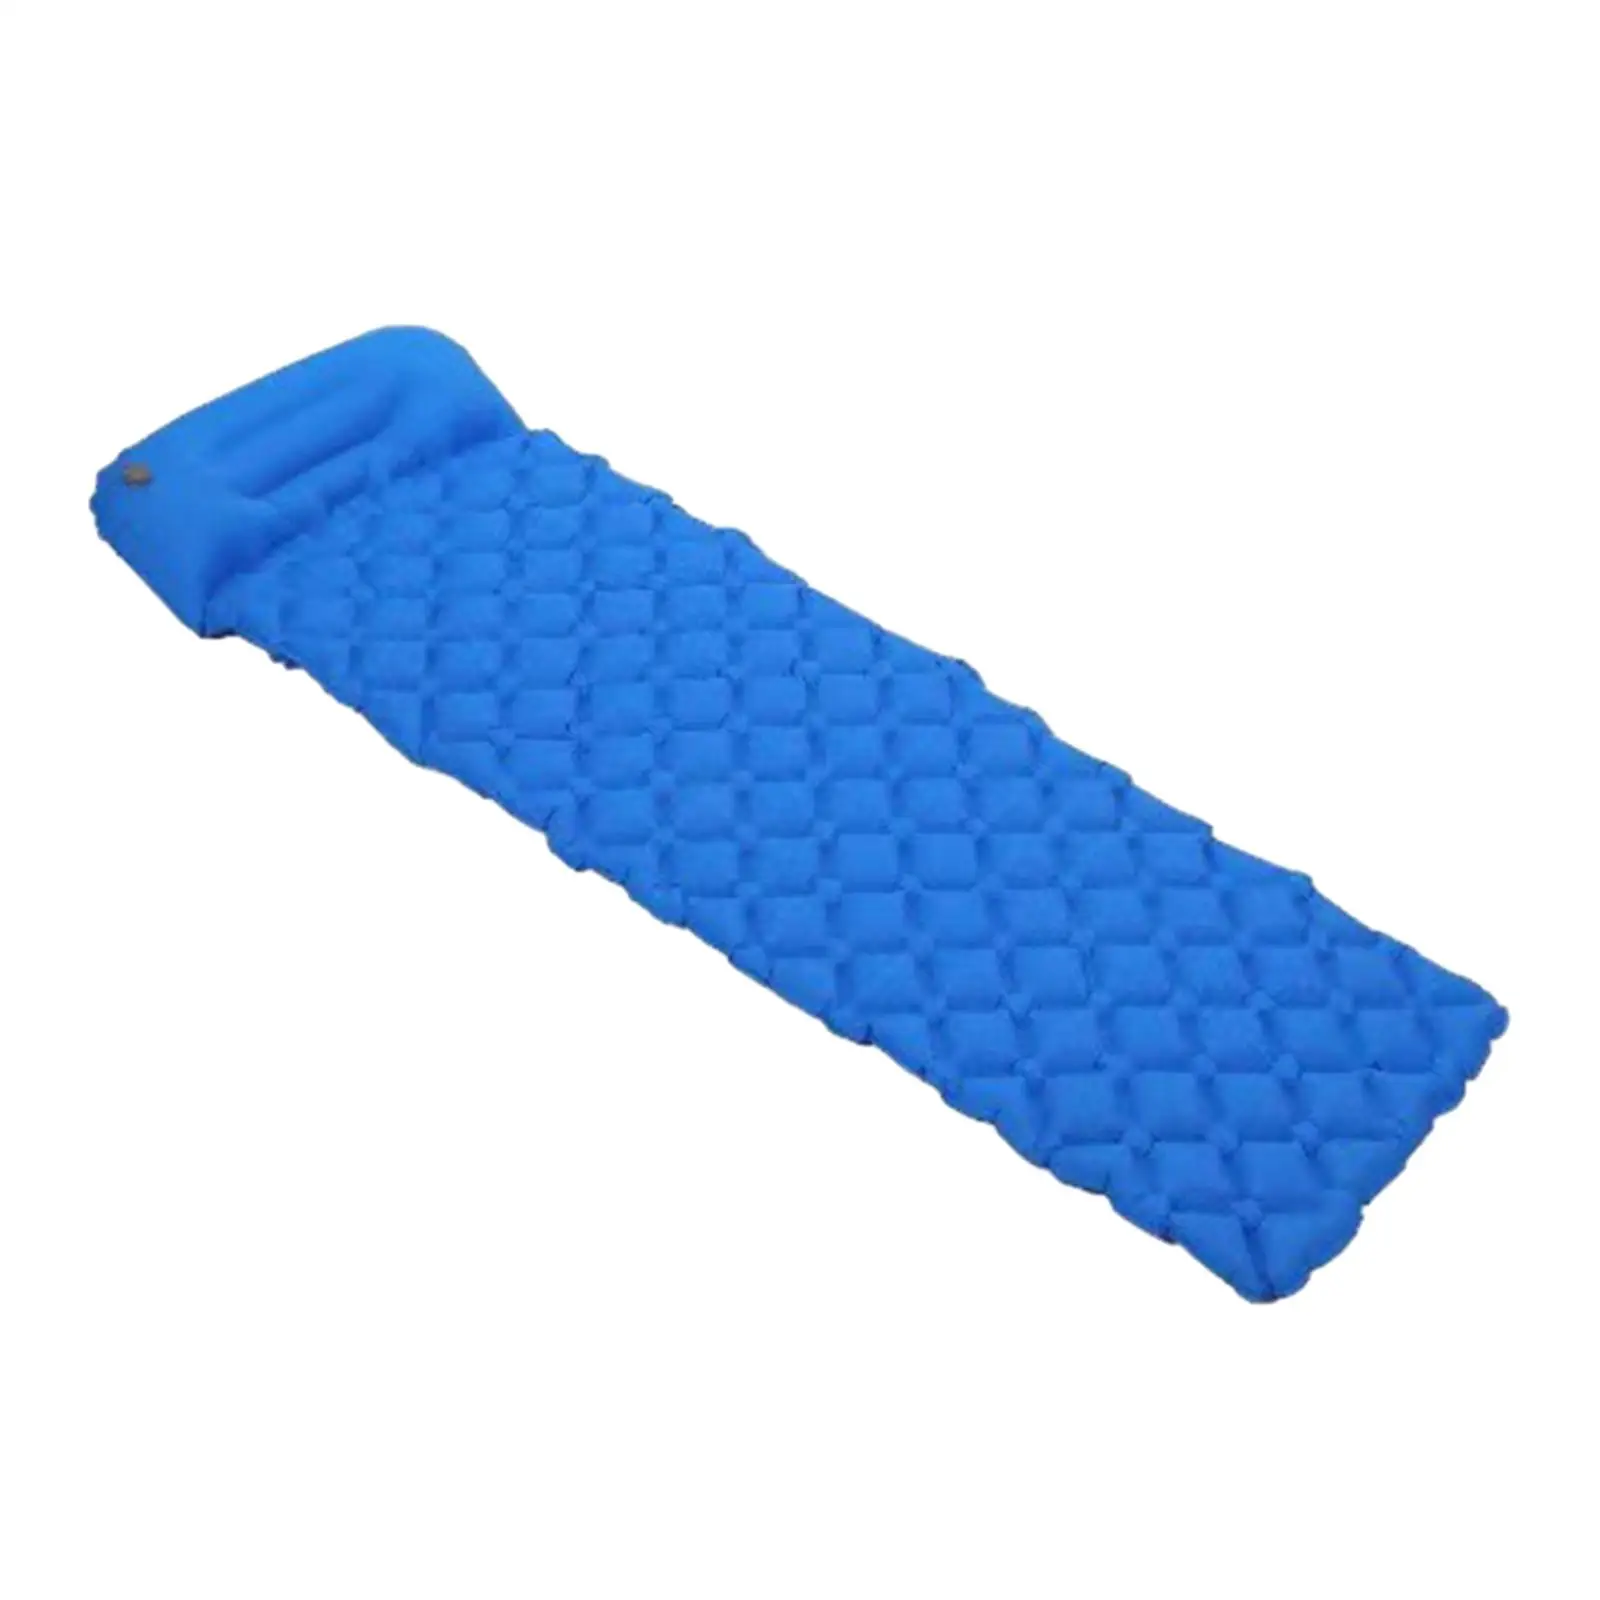 Camping Sleeping Pad with Pillow Waterproof Compact Self Inflating Sleeping Mat for Outdoor Tent Traveling Hiking Backpacking